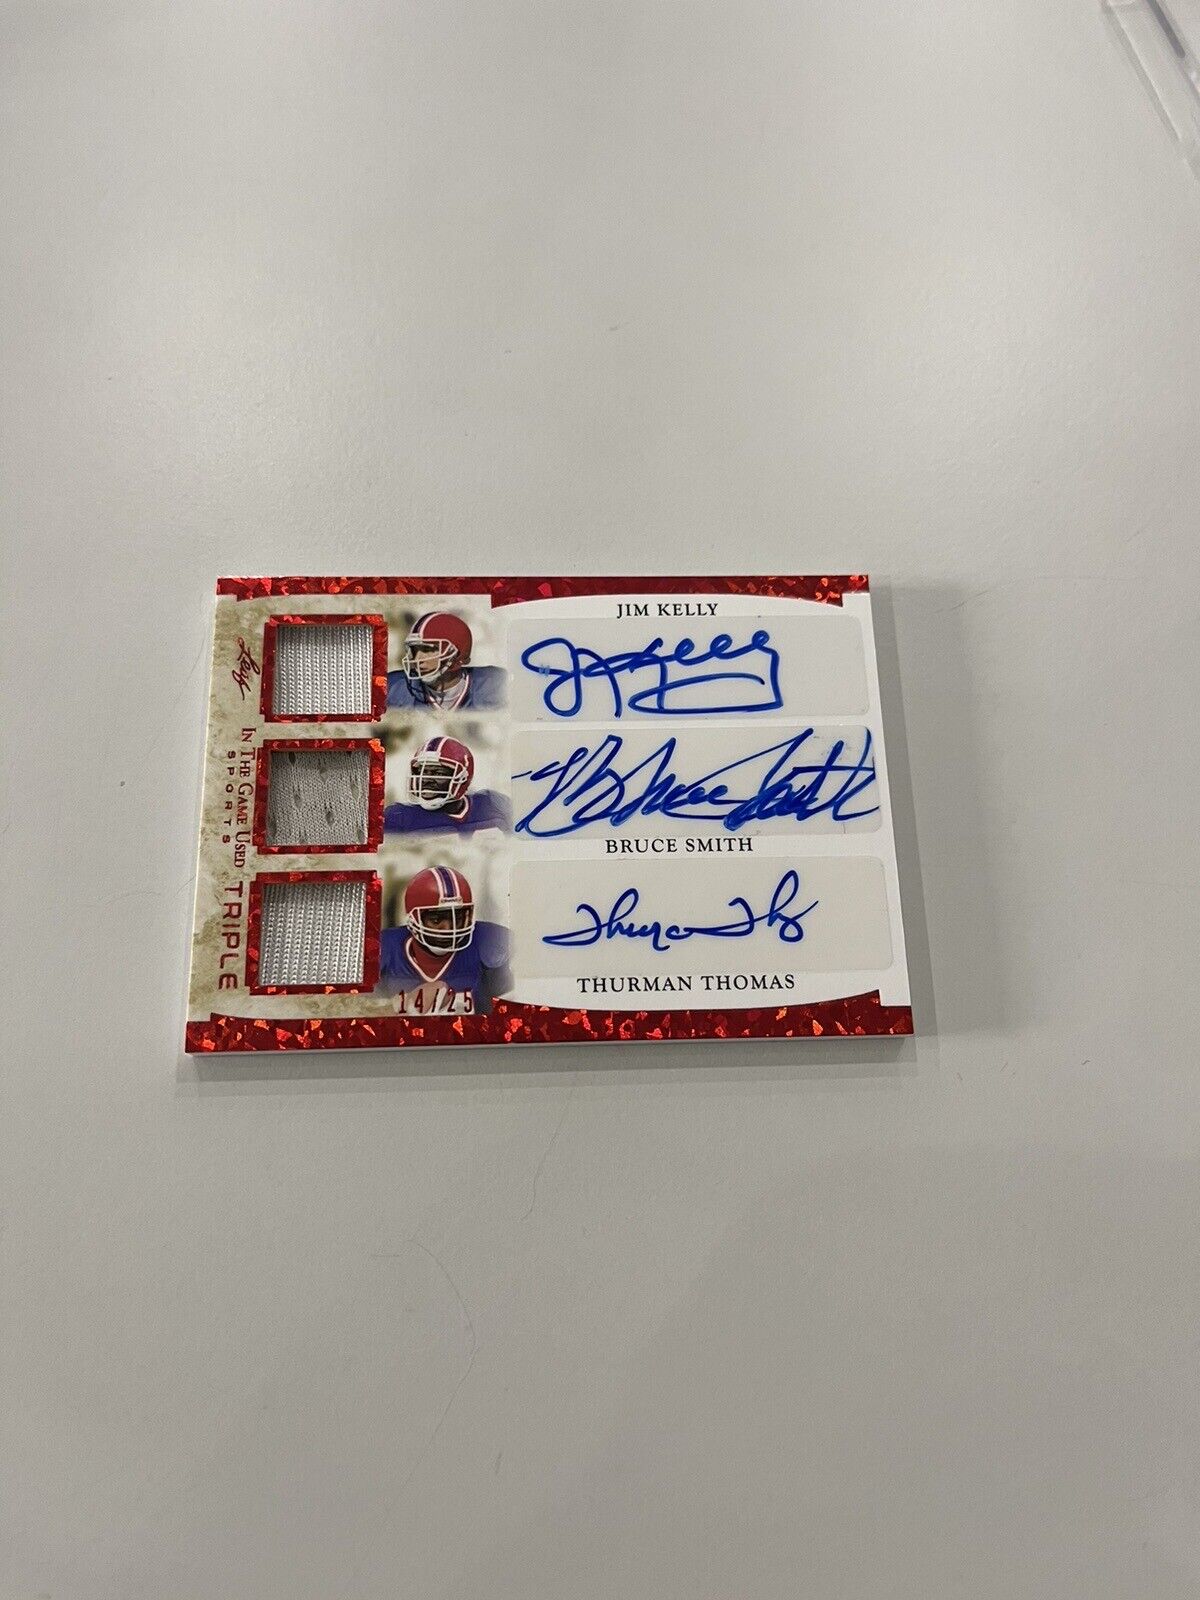 JIM KELLY BRUCE SMITH THURMAN THOMAS Triple Auto Card Jersey Used Red ITG 14/25